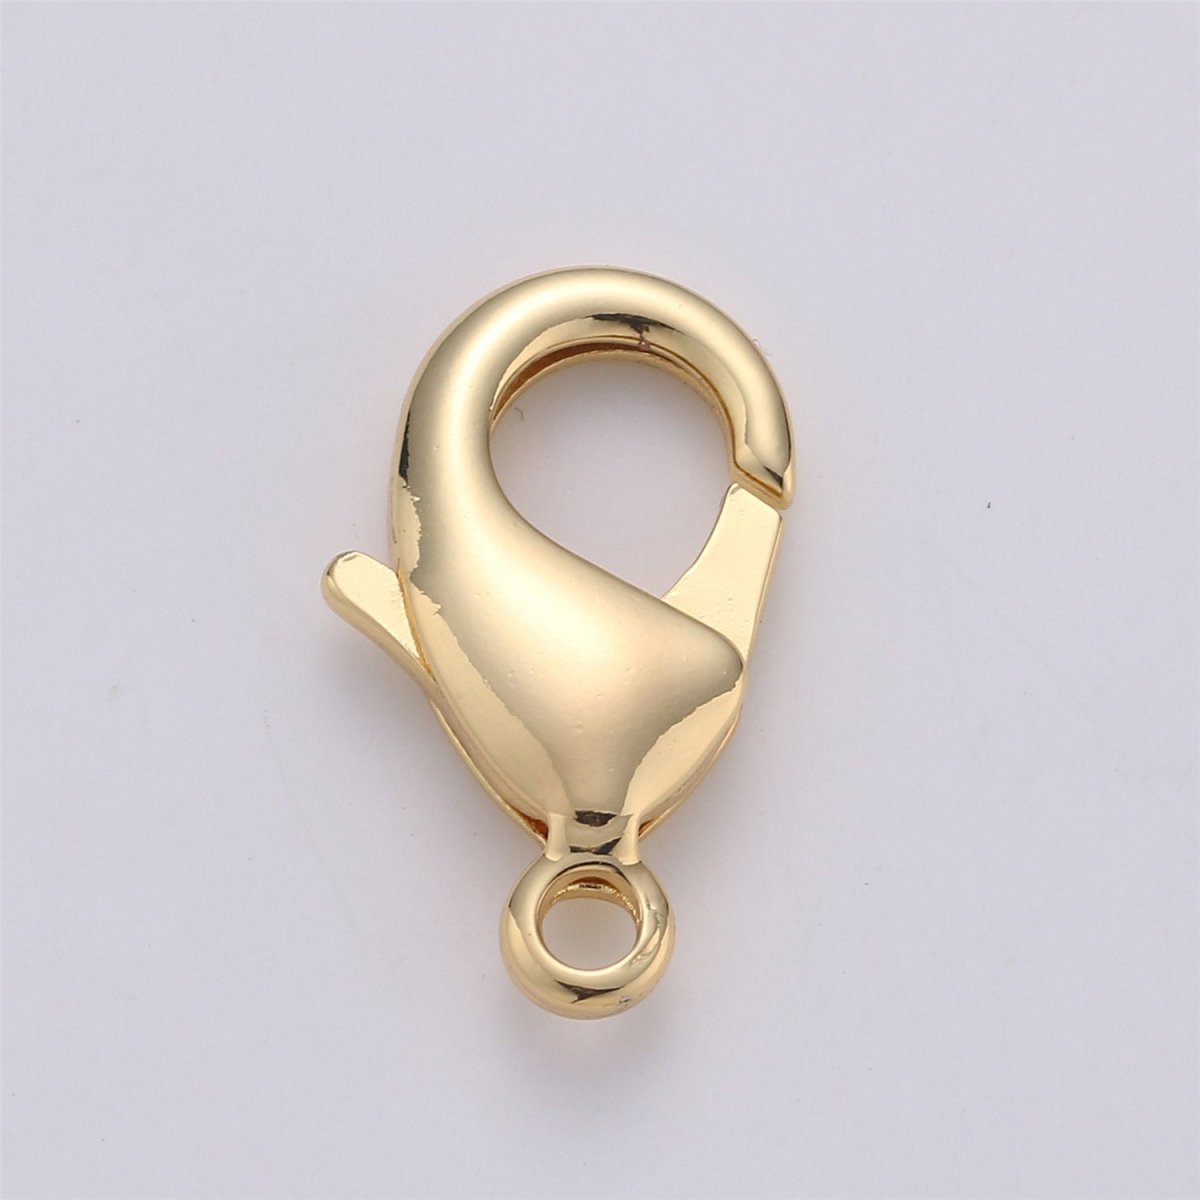 Wholesale Lobster Clasp 14K Gold Filled, Lobster Claw with Jump Ring for Jewelry Making, 17mm 23mm 27mm Closure | K-344 K-346 K-347 - DLUXCA